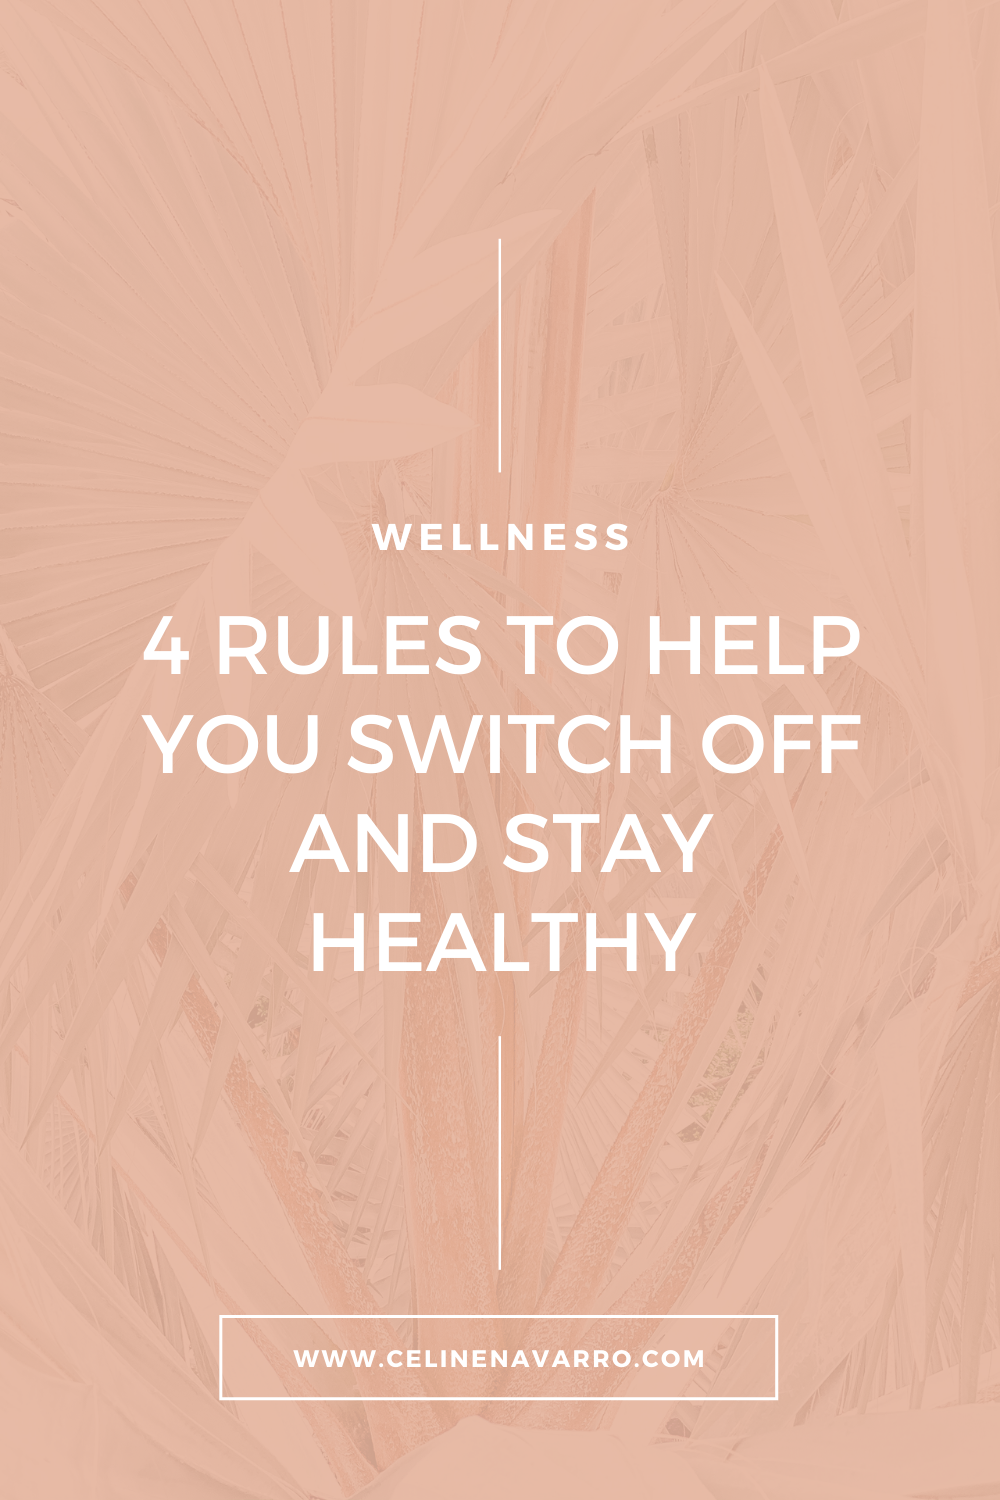 4 RULES TO HELP YOU SWITCH OFF AND STAY HEALTHY